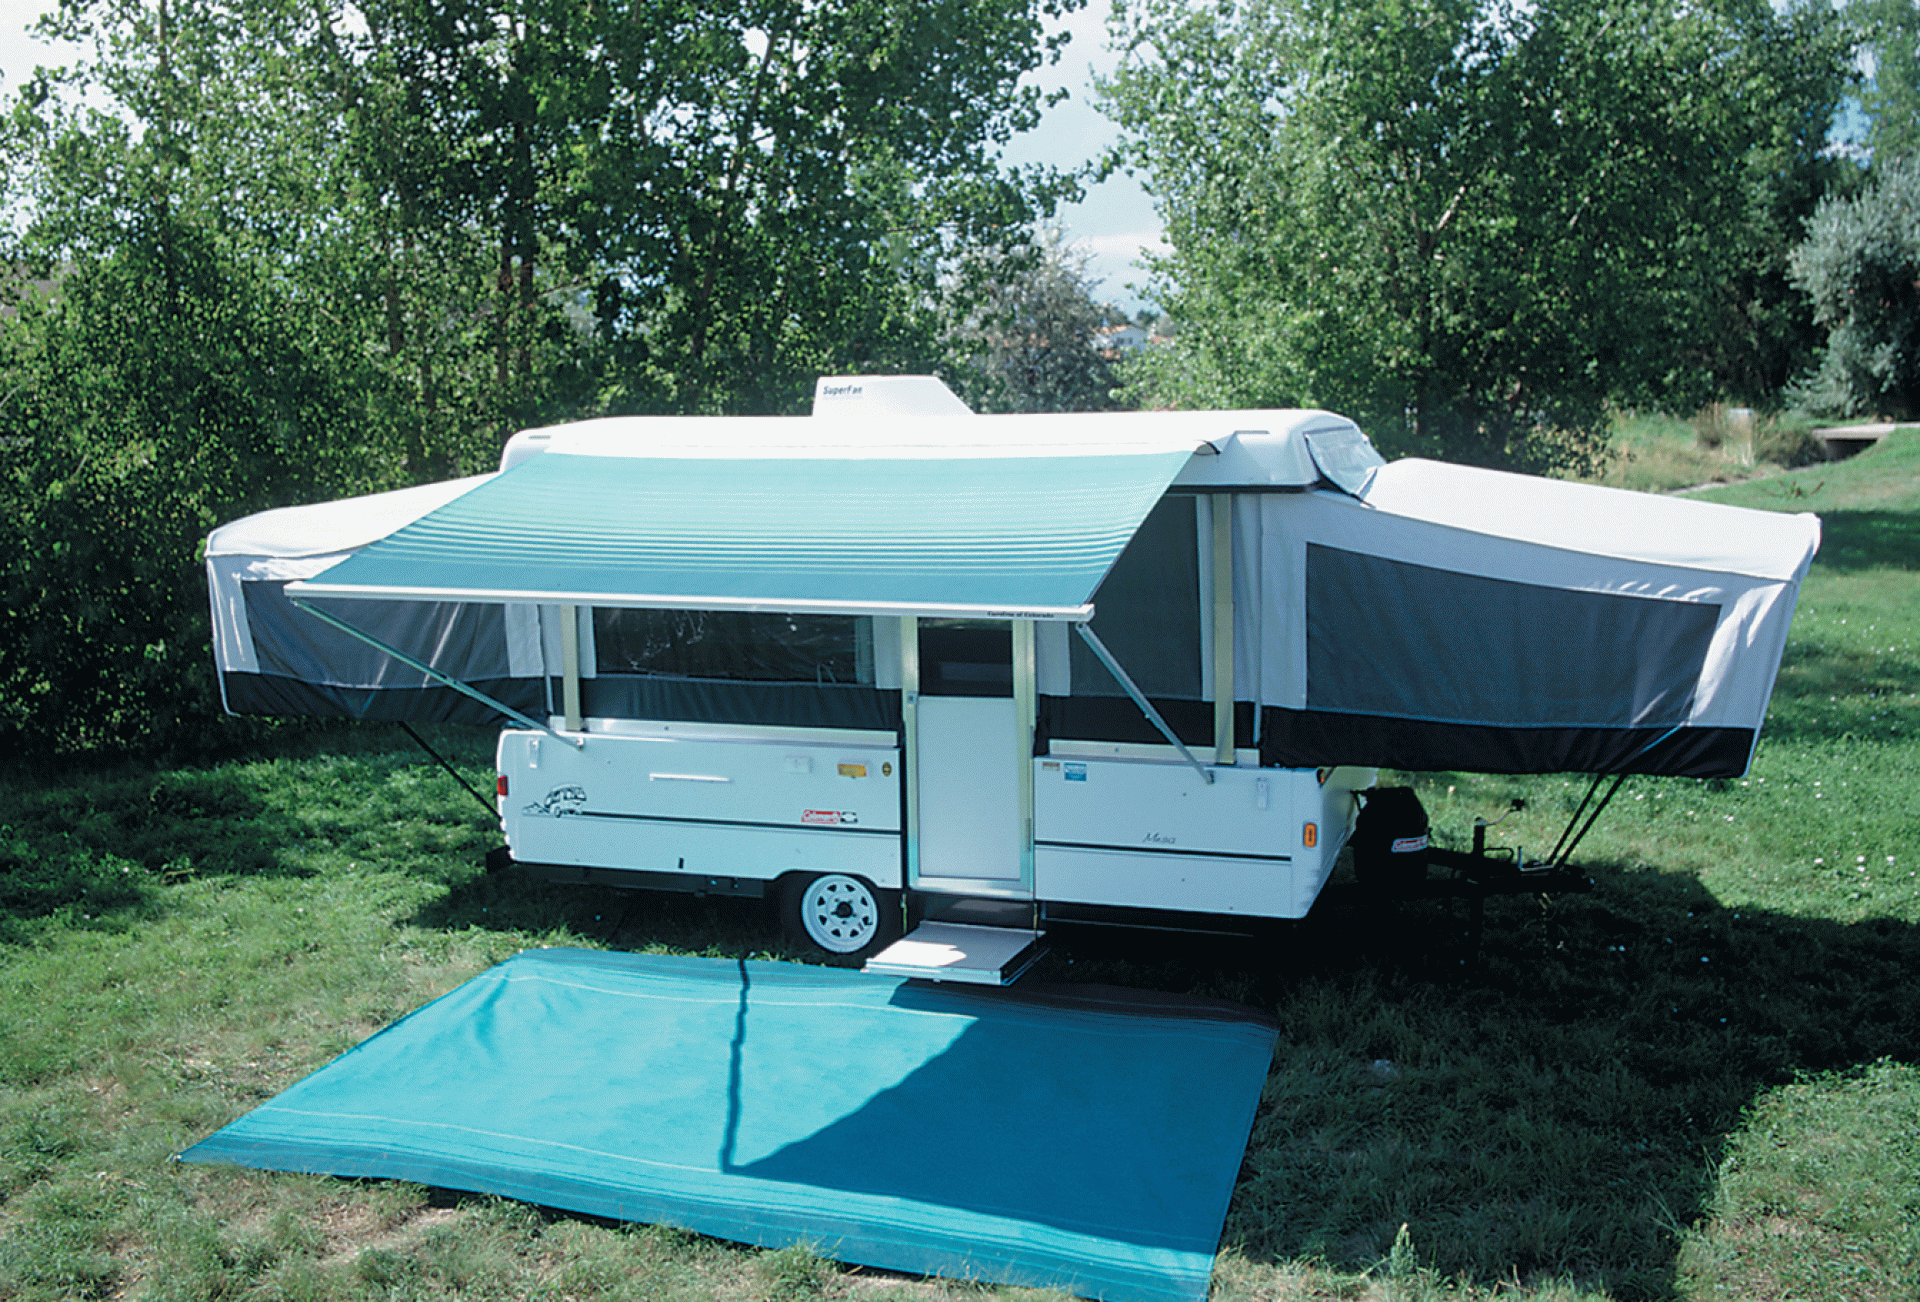 CAREFREE OF COLORADO | 981018C00 | Campout Awning Metric 2.5 Metric 8' 5" Teal Dune Stripe with White Bag